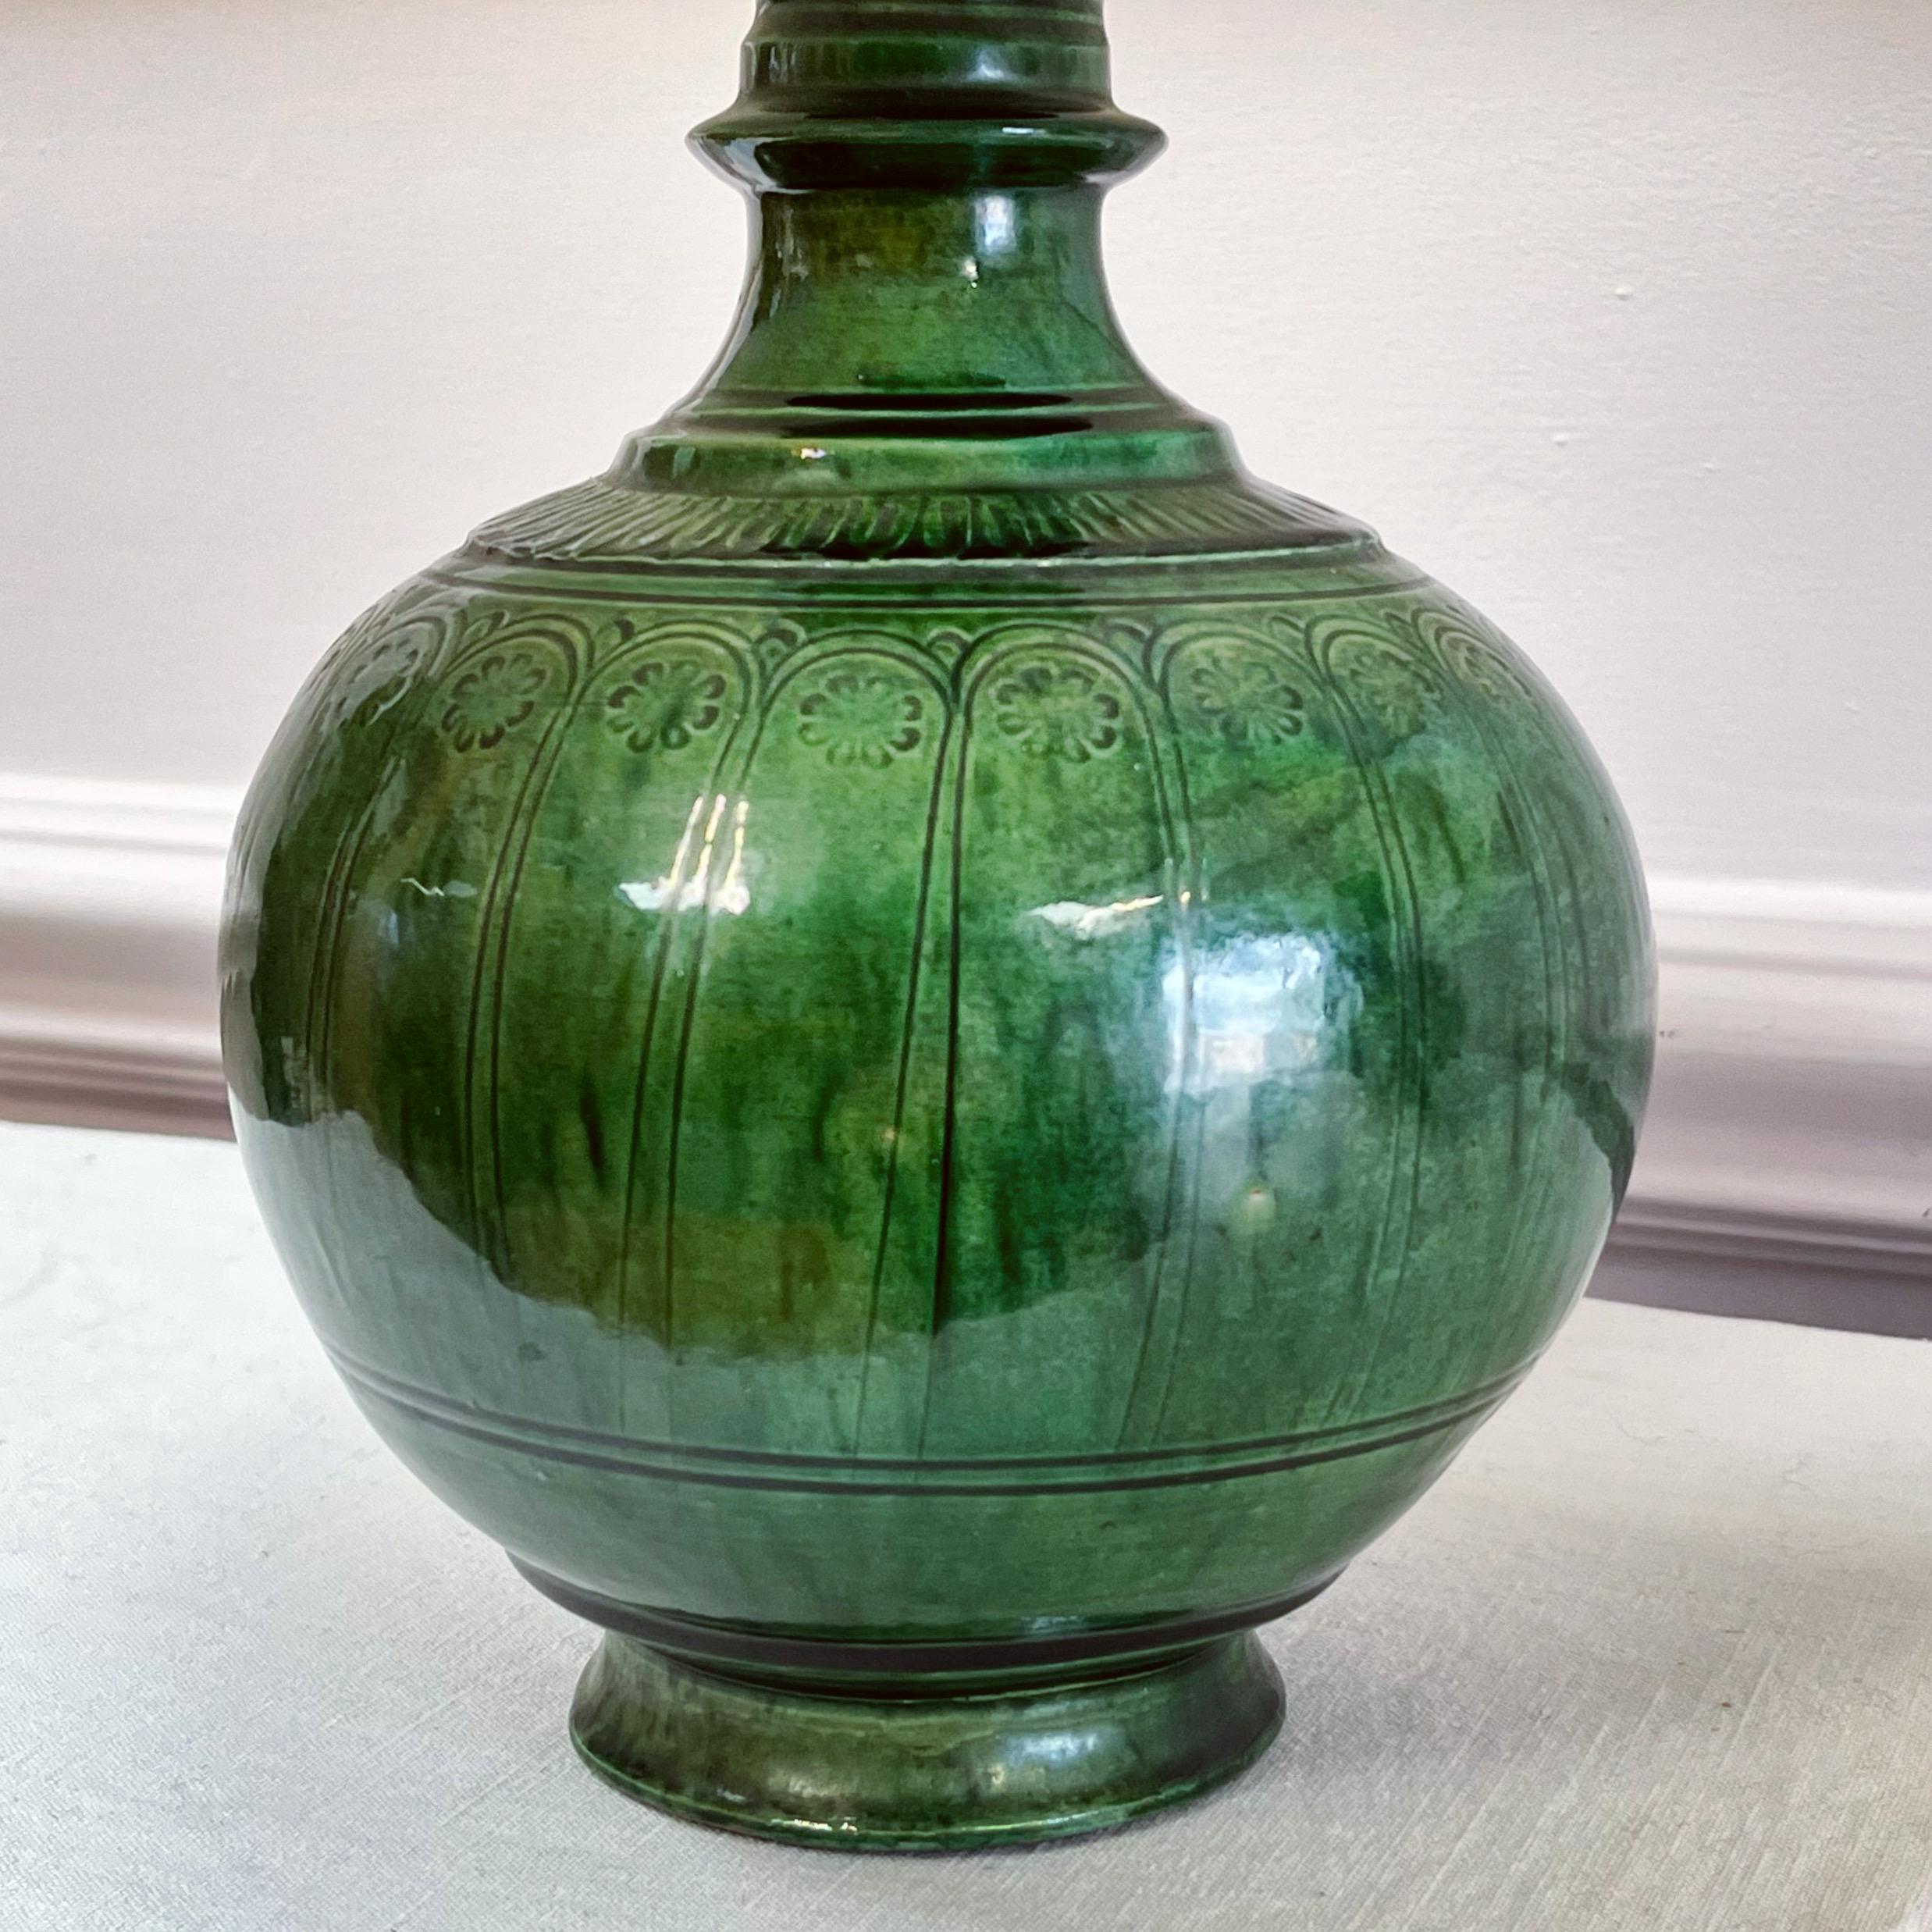 Each of spherical forms and widening tubular necks, arched floral motifs around the shoulder and rich iridescence green glaze. Typical of green glazed pottery from the Umayyad dynasty.

Iranian, Late Nineteenth Century


Inquire about this piece

H